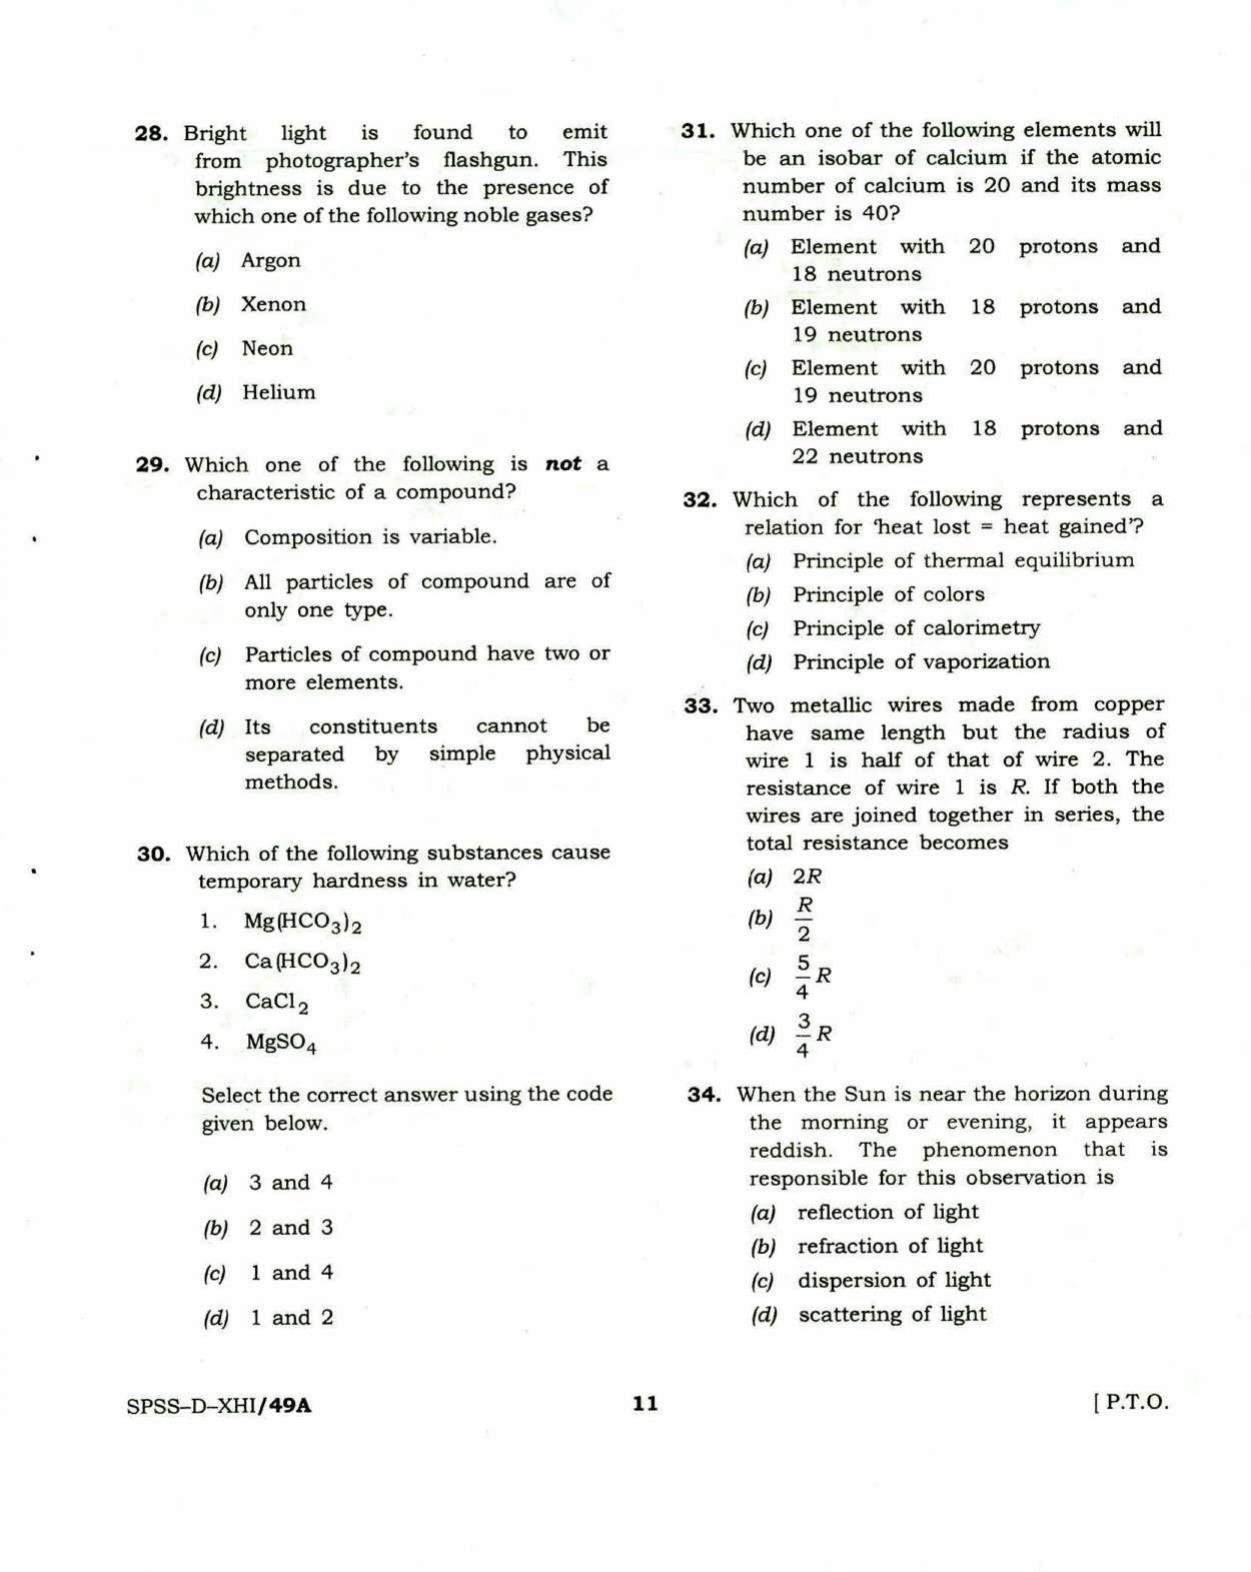 PBSSD General Knowledge Solved Papers - Page 11